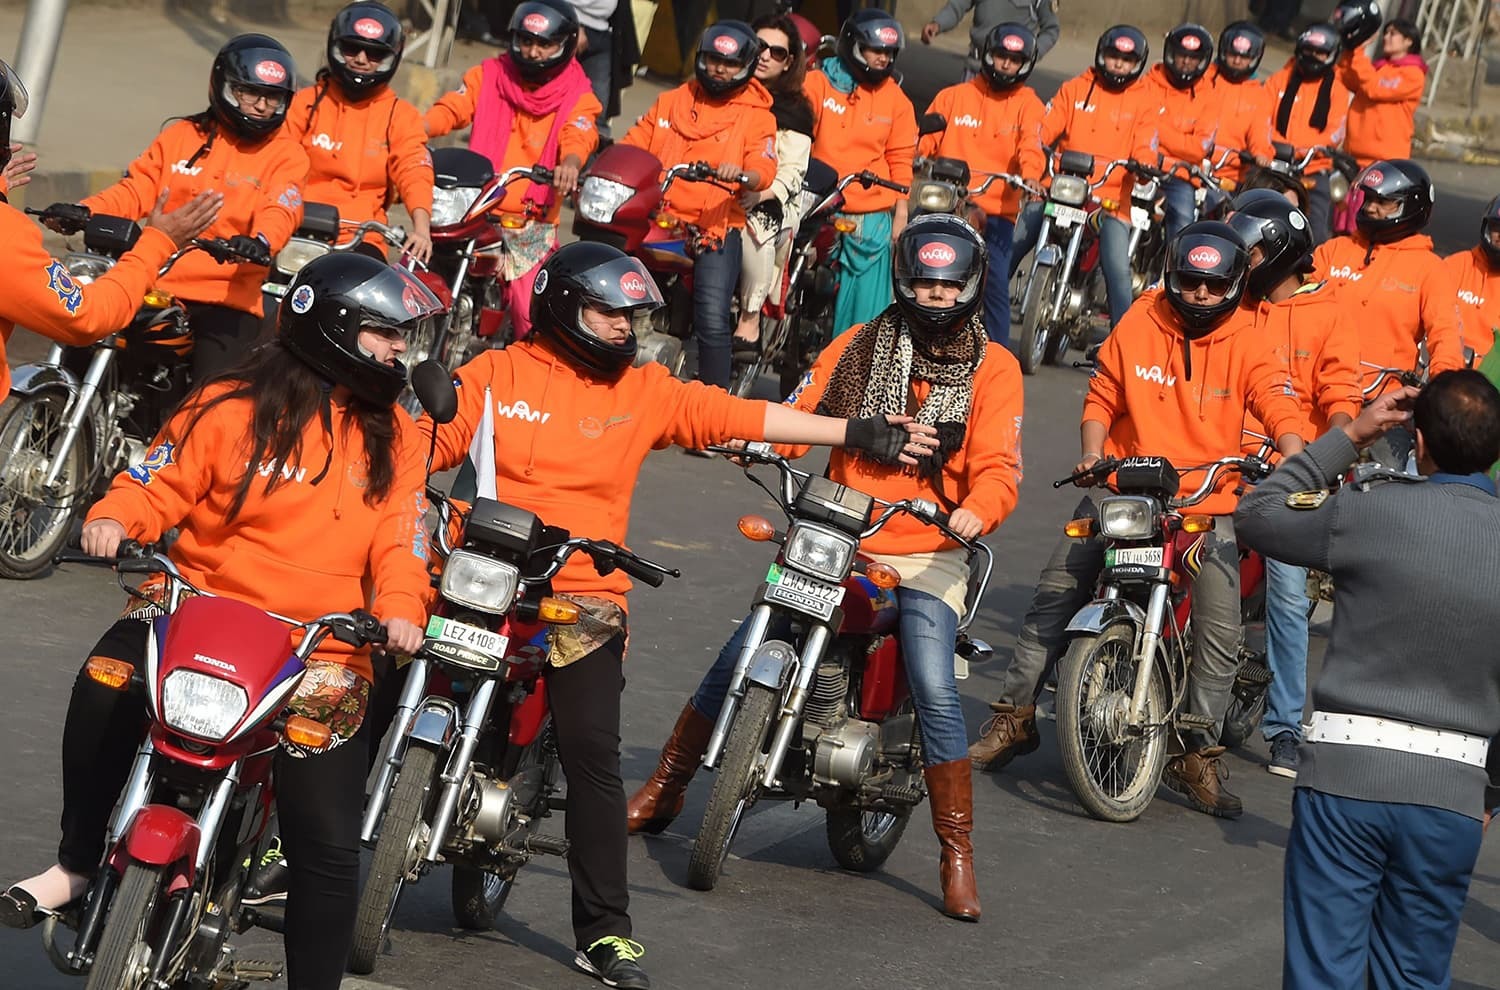 Women participants of Women on Wheels (WOW) wait on their motor-bikes prior to the start of a rally launching the Women on Wheels campaign in Lahore on January 10, 2016. AFP PHOTO / Arif ALI